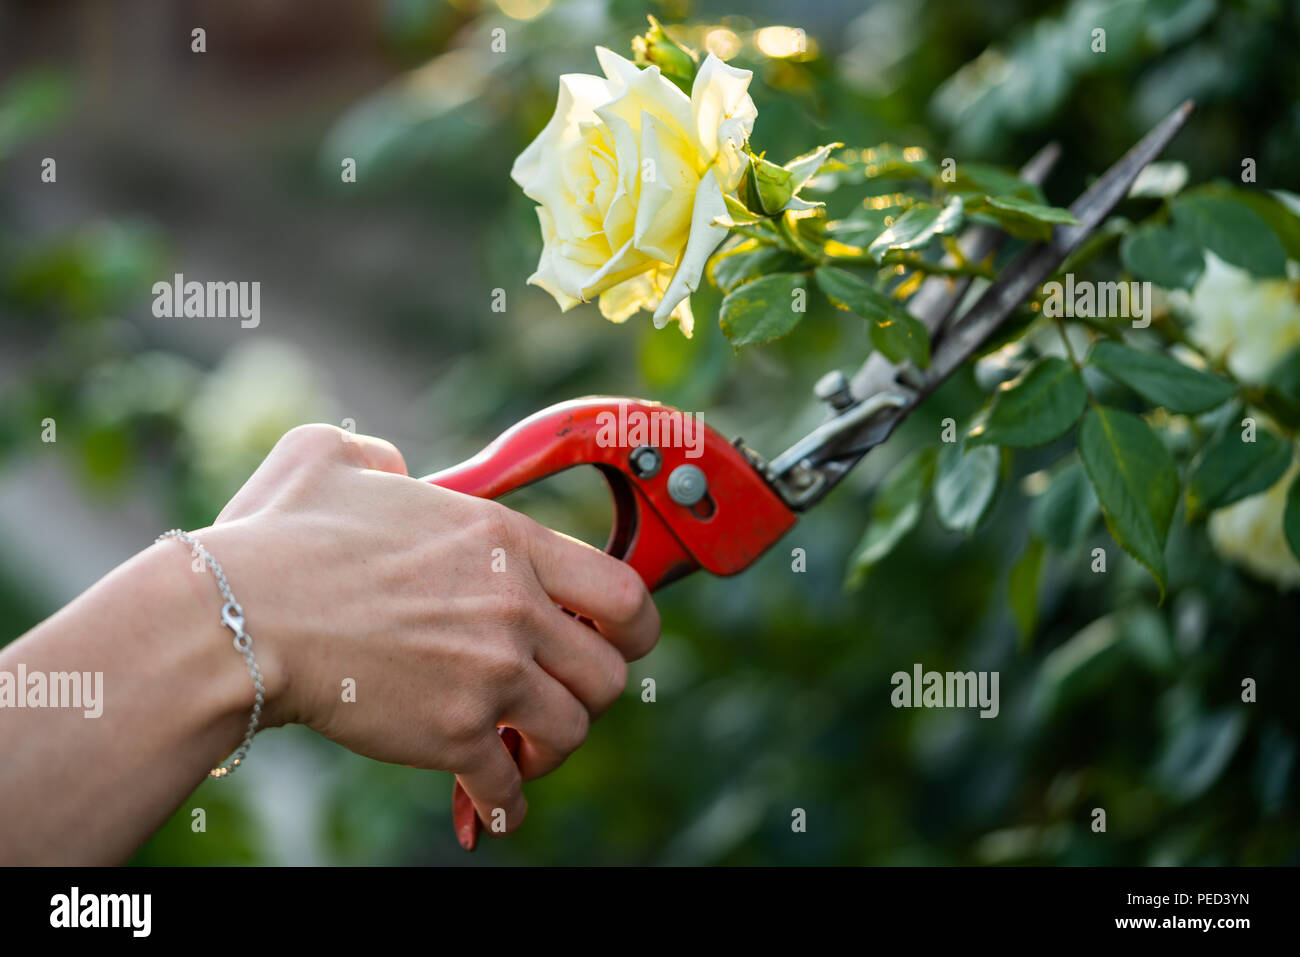 A woman cuts a rose with a pruner. Stock Photo